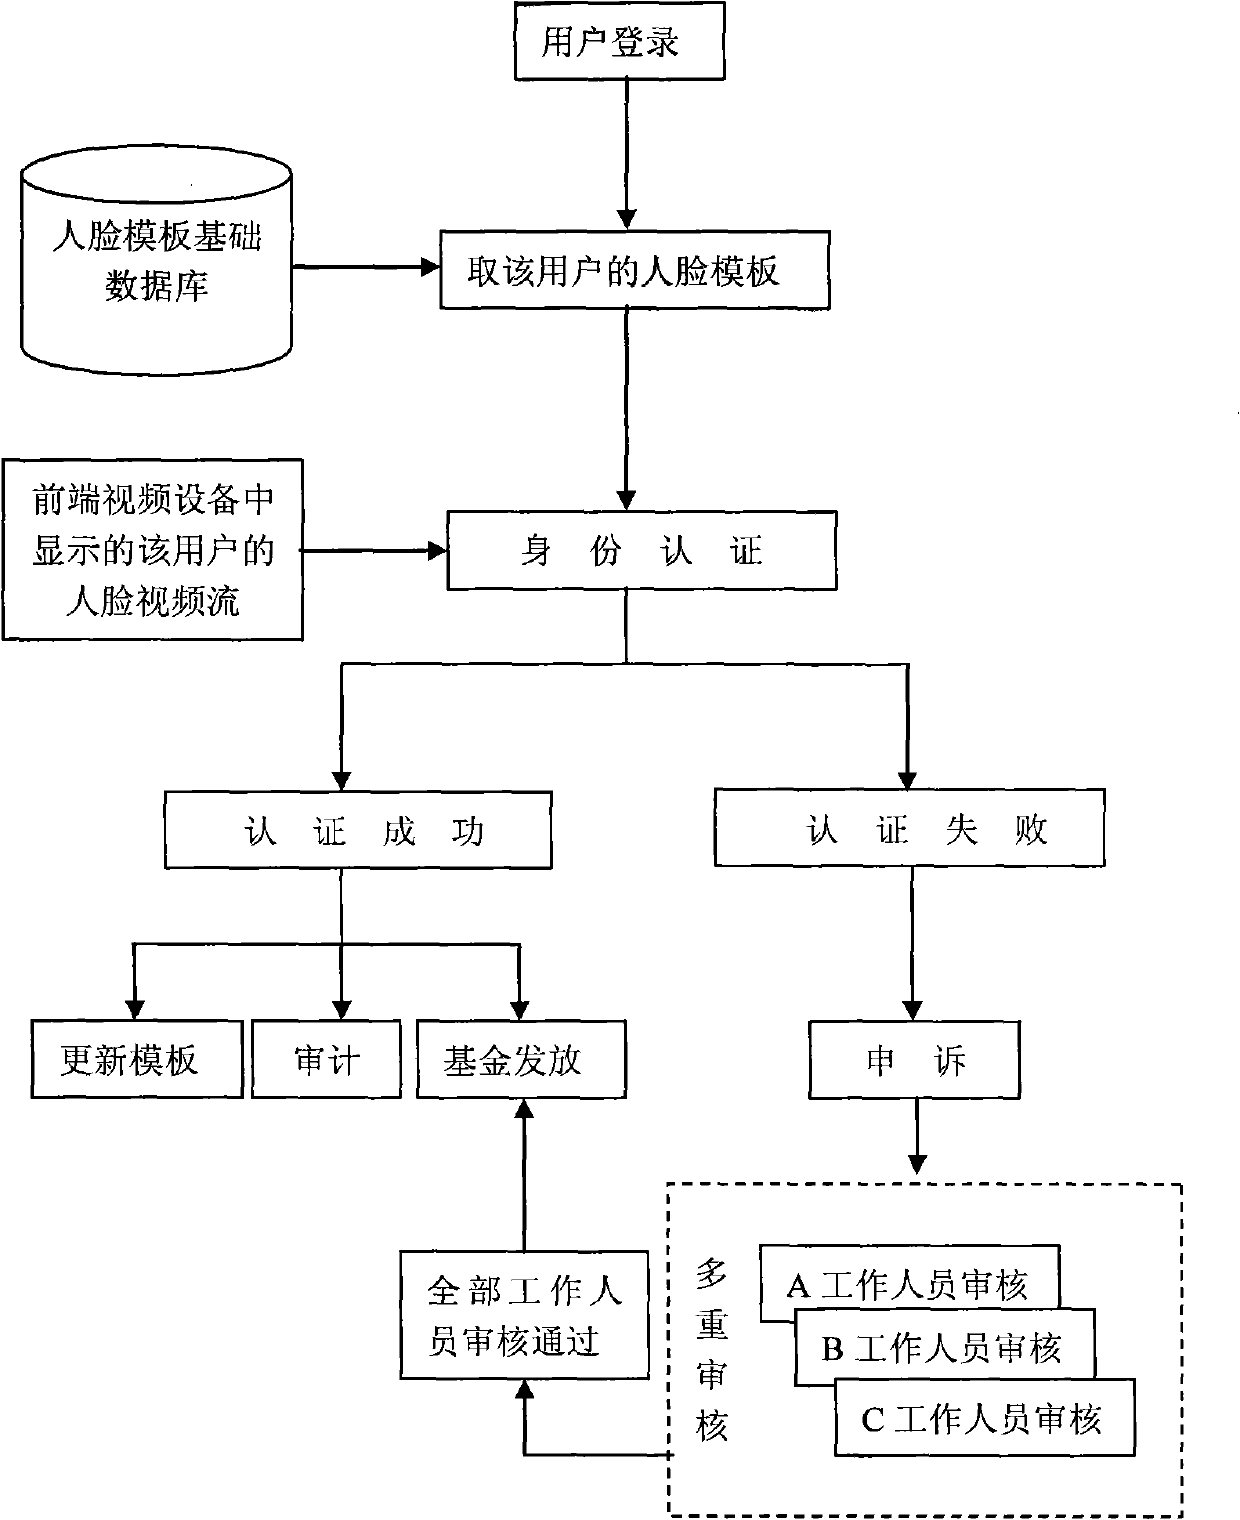 Social insurance identity authentication method based on face recognition and living body detection